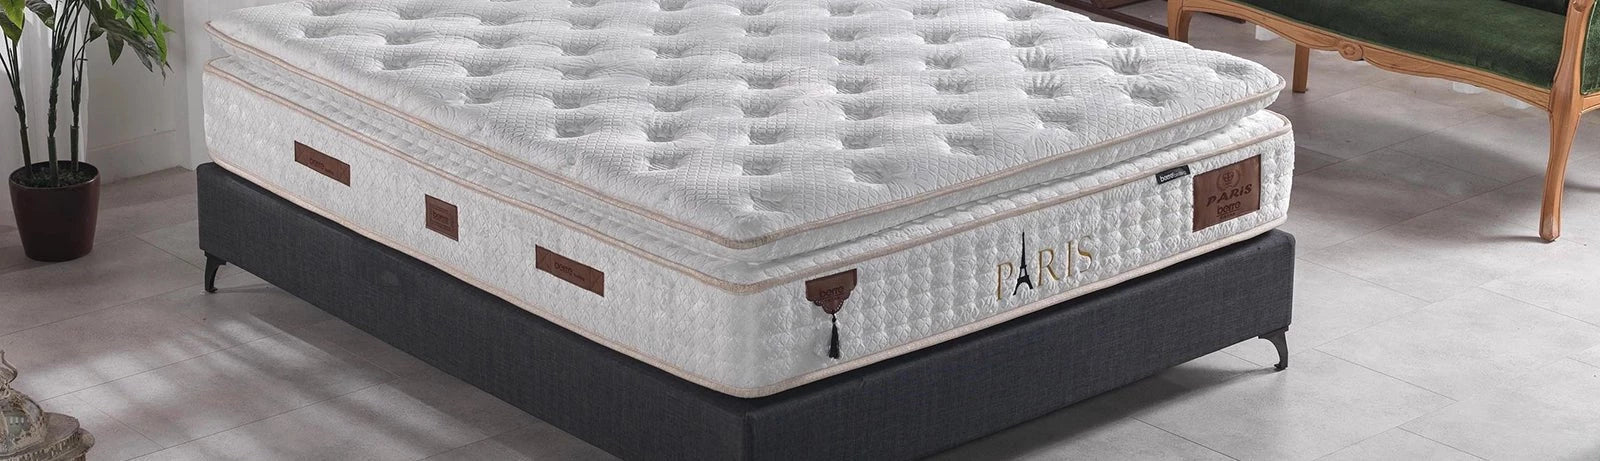 Canadian Mattress Collection - Berre Furniture